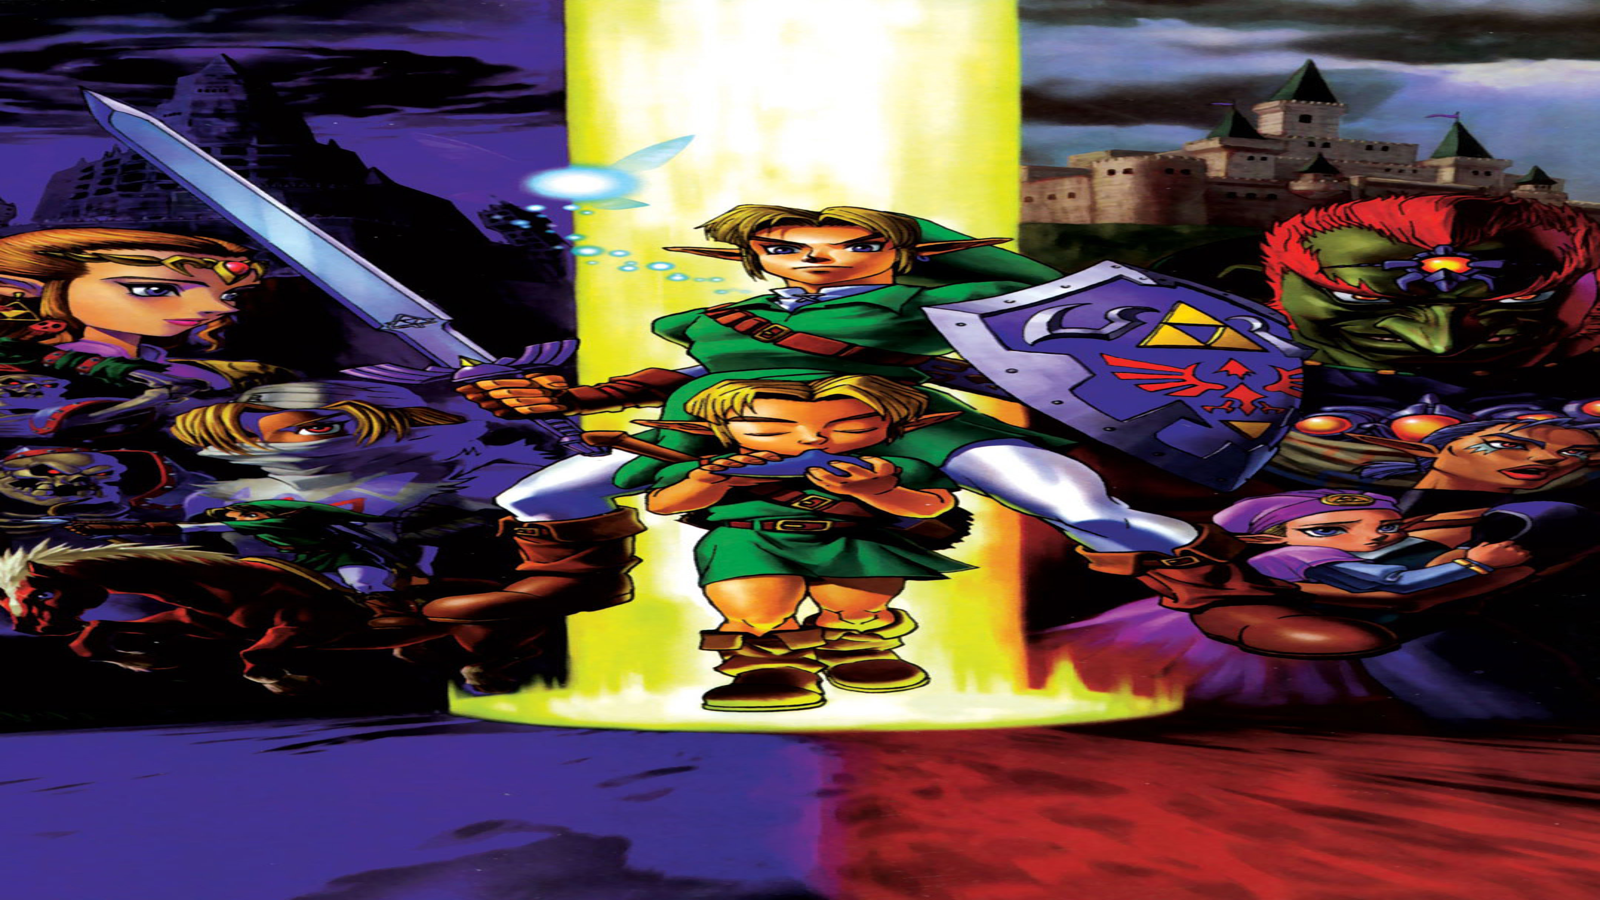 Ocarina of Time: A game that remains the pinnacle of Zelda 25 years later